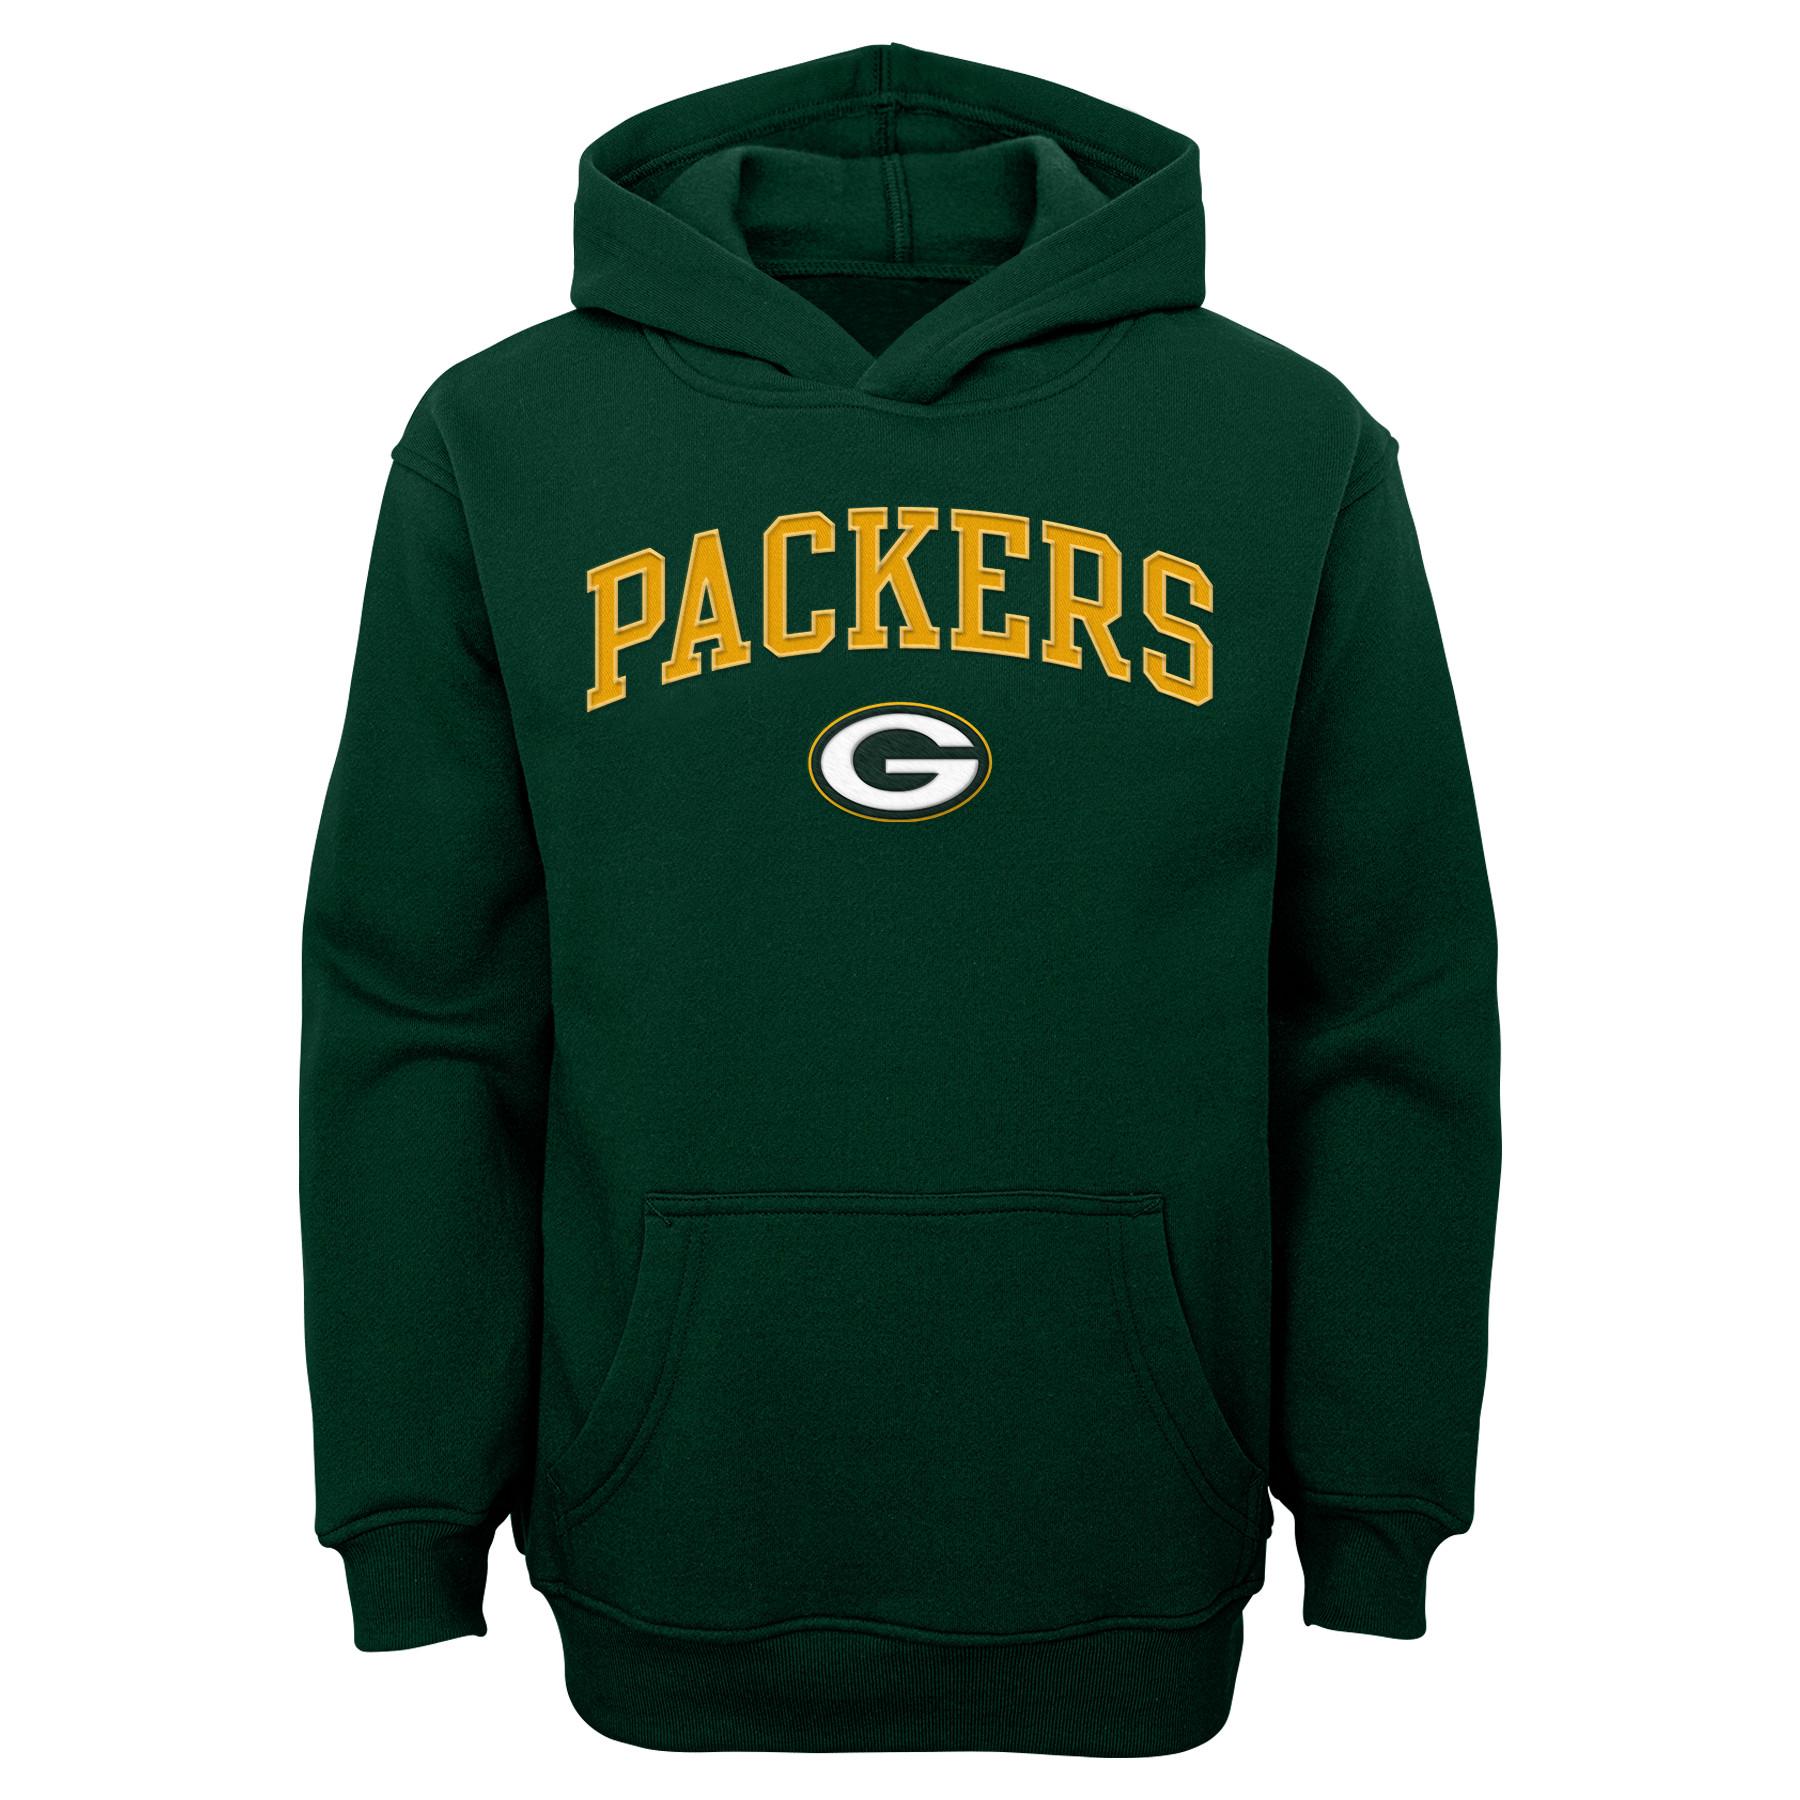 NFL Boys' Graphic Hoodie - Green Bay Packers